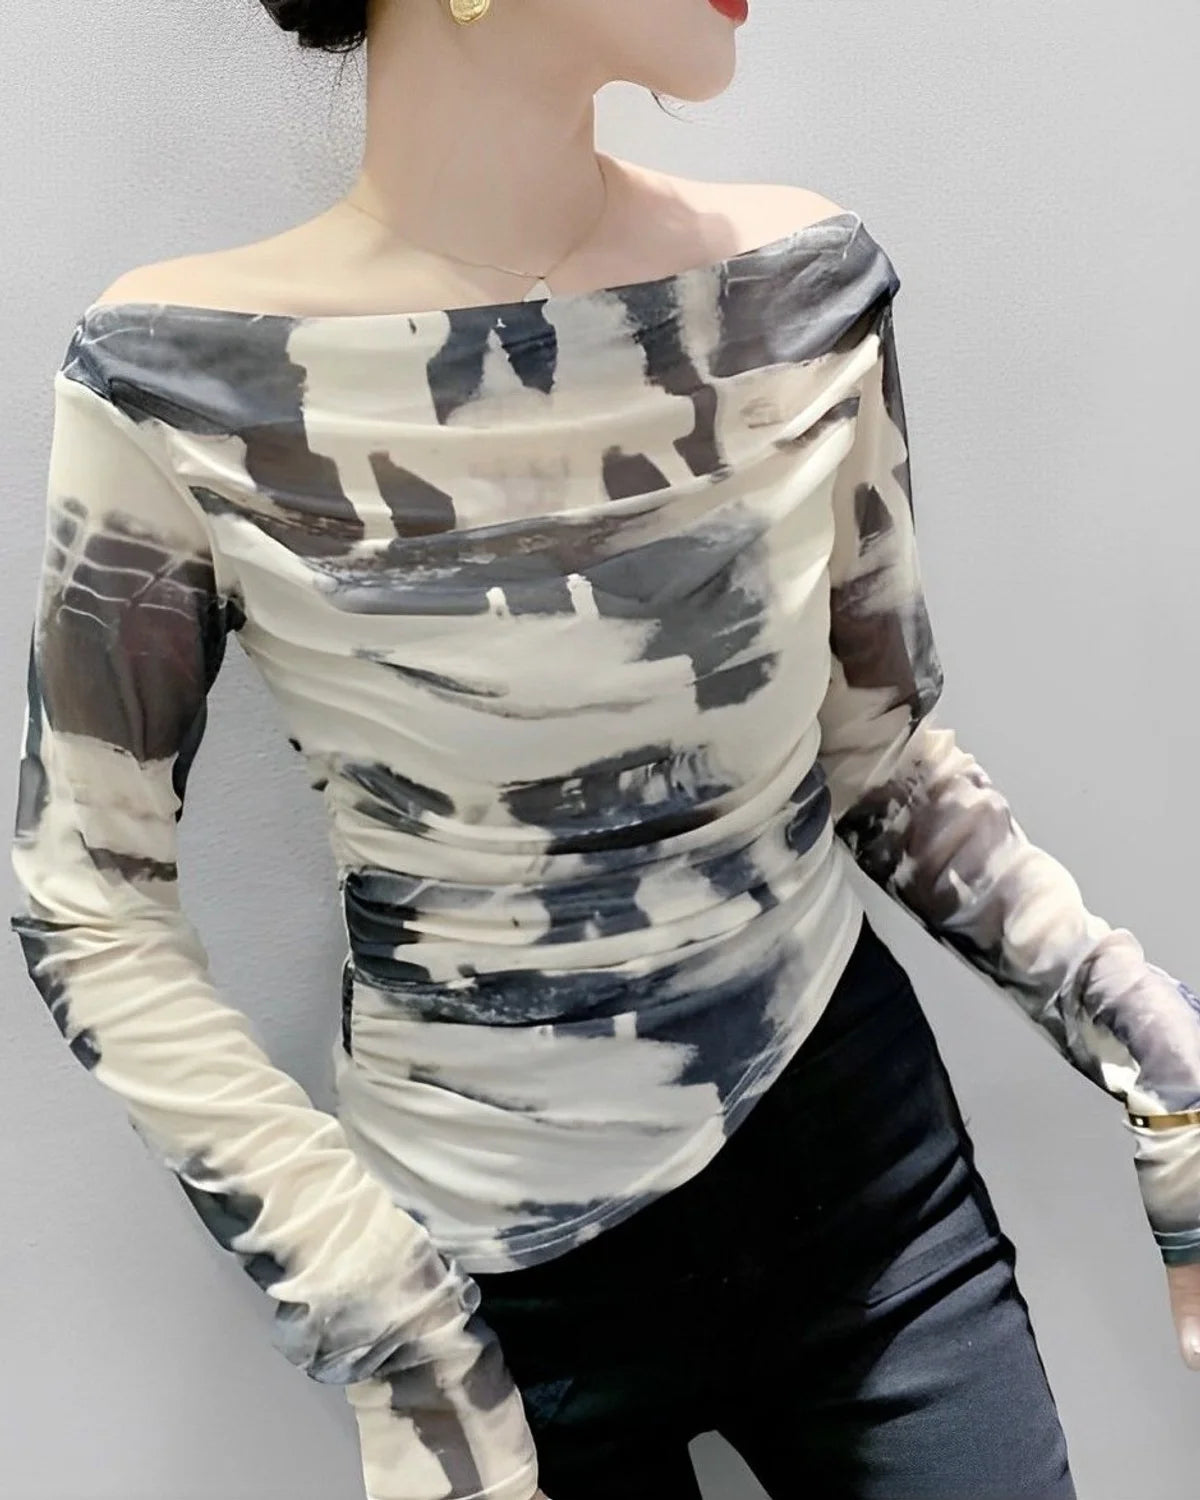 ABSTRACT PRINTED TOP,abstract, casual, fitted, knitted, long sleeves, mesh, multi colored, off shoulder neck, printed, regular, ruched, slim fit, streetwear, stretchable, summer, tops, topwear,abstract-printed-ruched-waist-top-whiteblack,Neck - Boat neckSleeve - Full sleevesFit - Slim fitPrint/Pattern - Abstract printedColor - White and blackMaterial - Lycra meshSize - Bust (32-40) inch